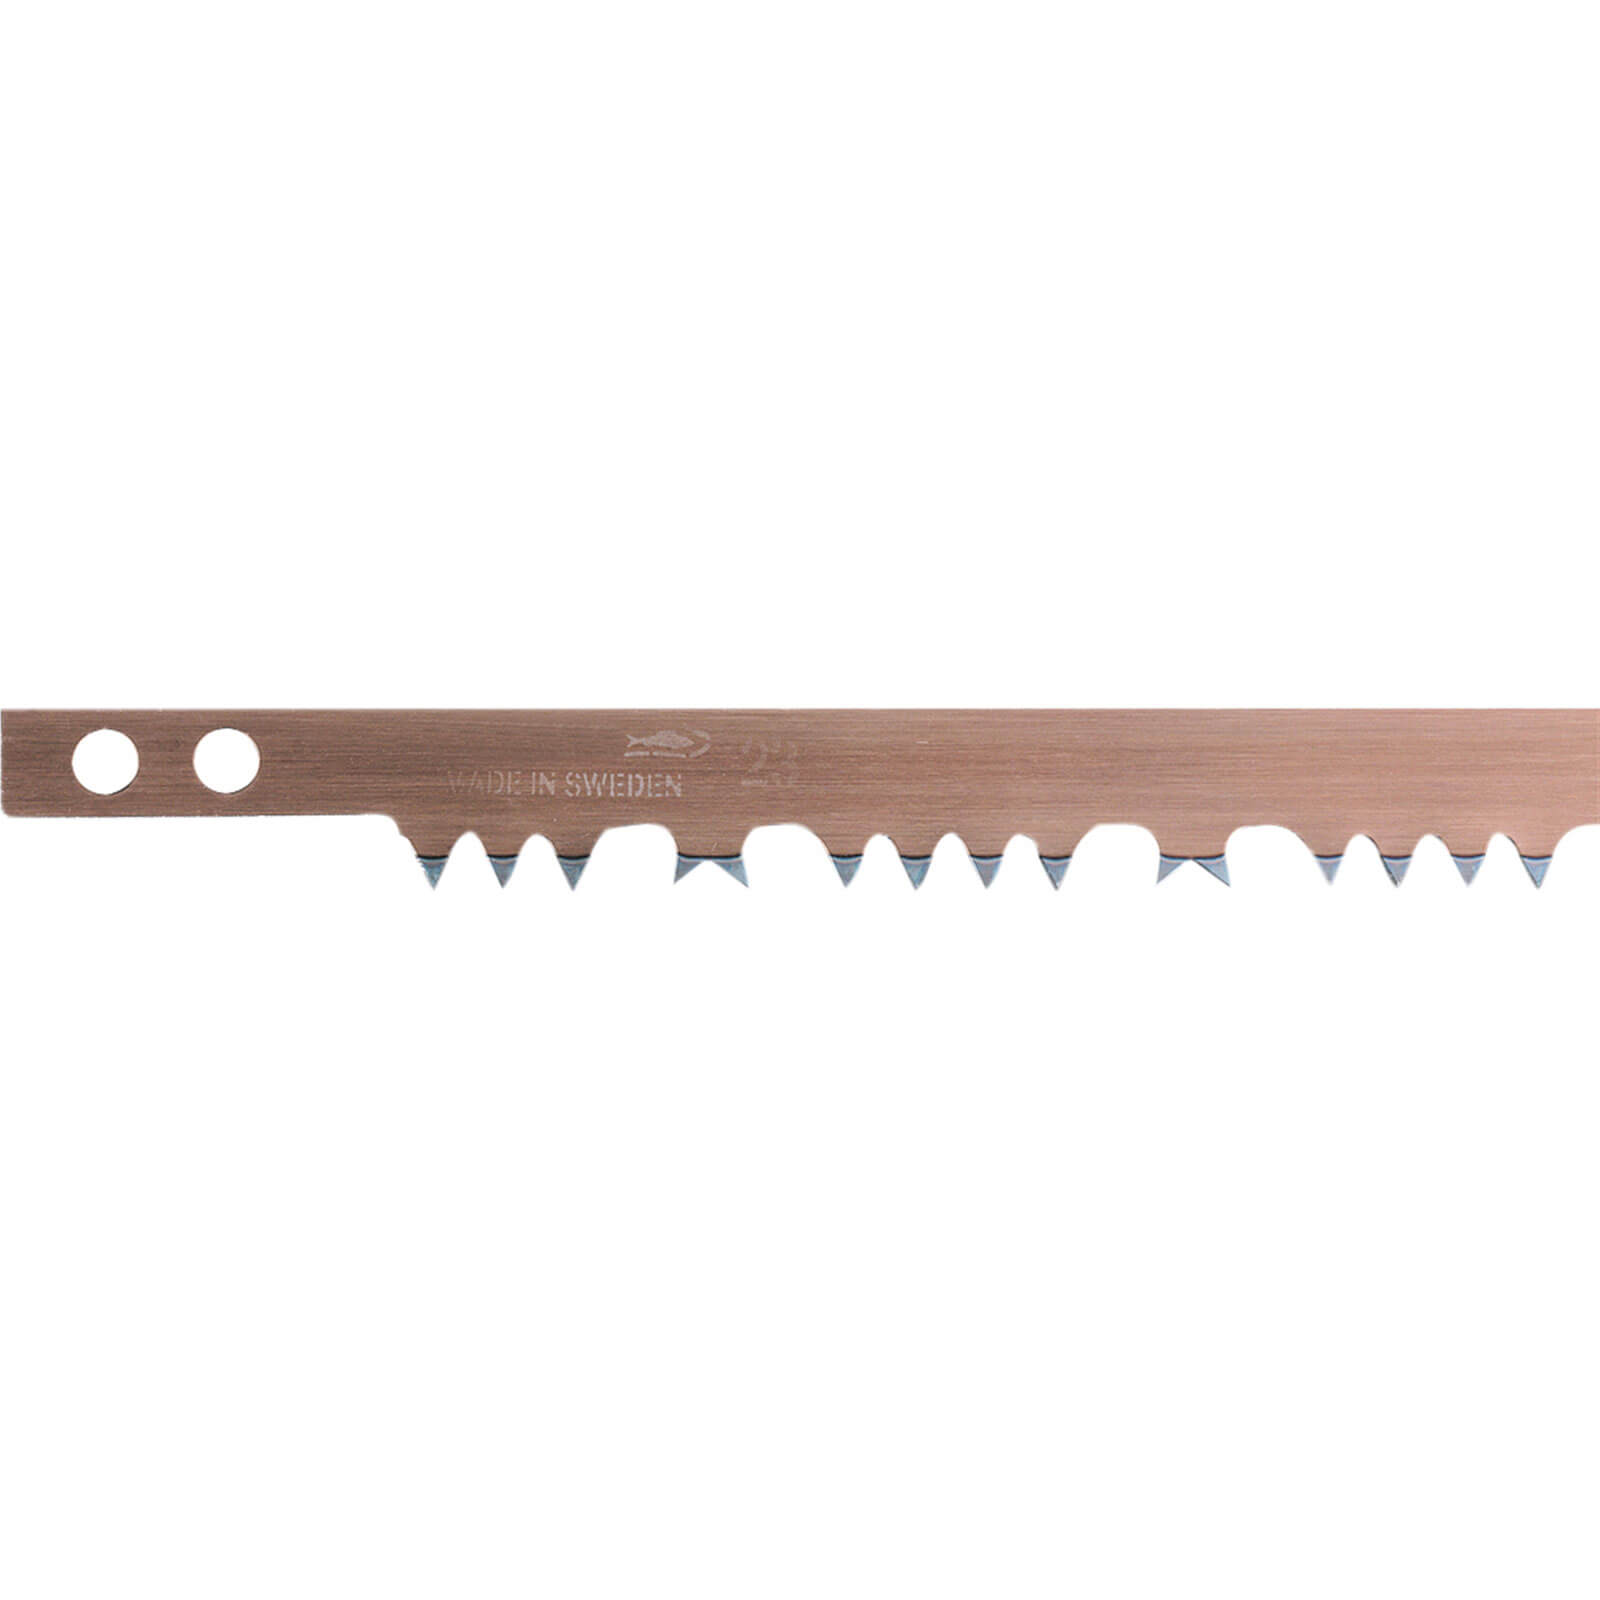 Bahco Raker Tooth Hard Point Bow Saw Blade 30&quot / 759mm For Green Wood